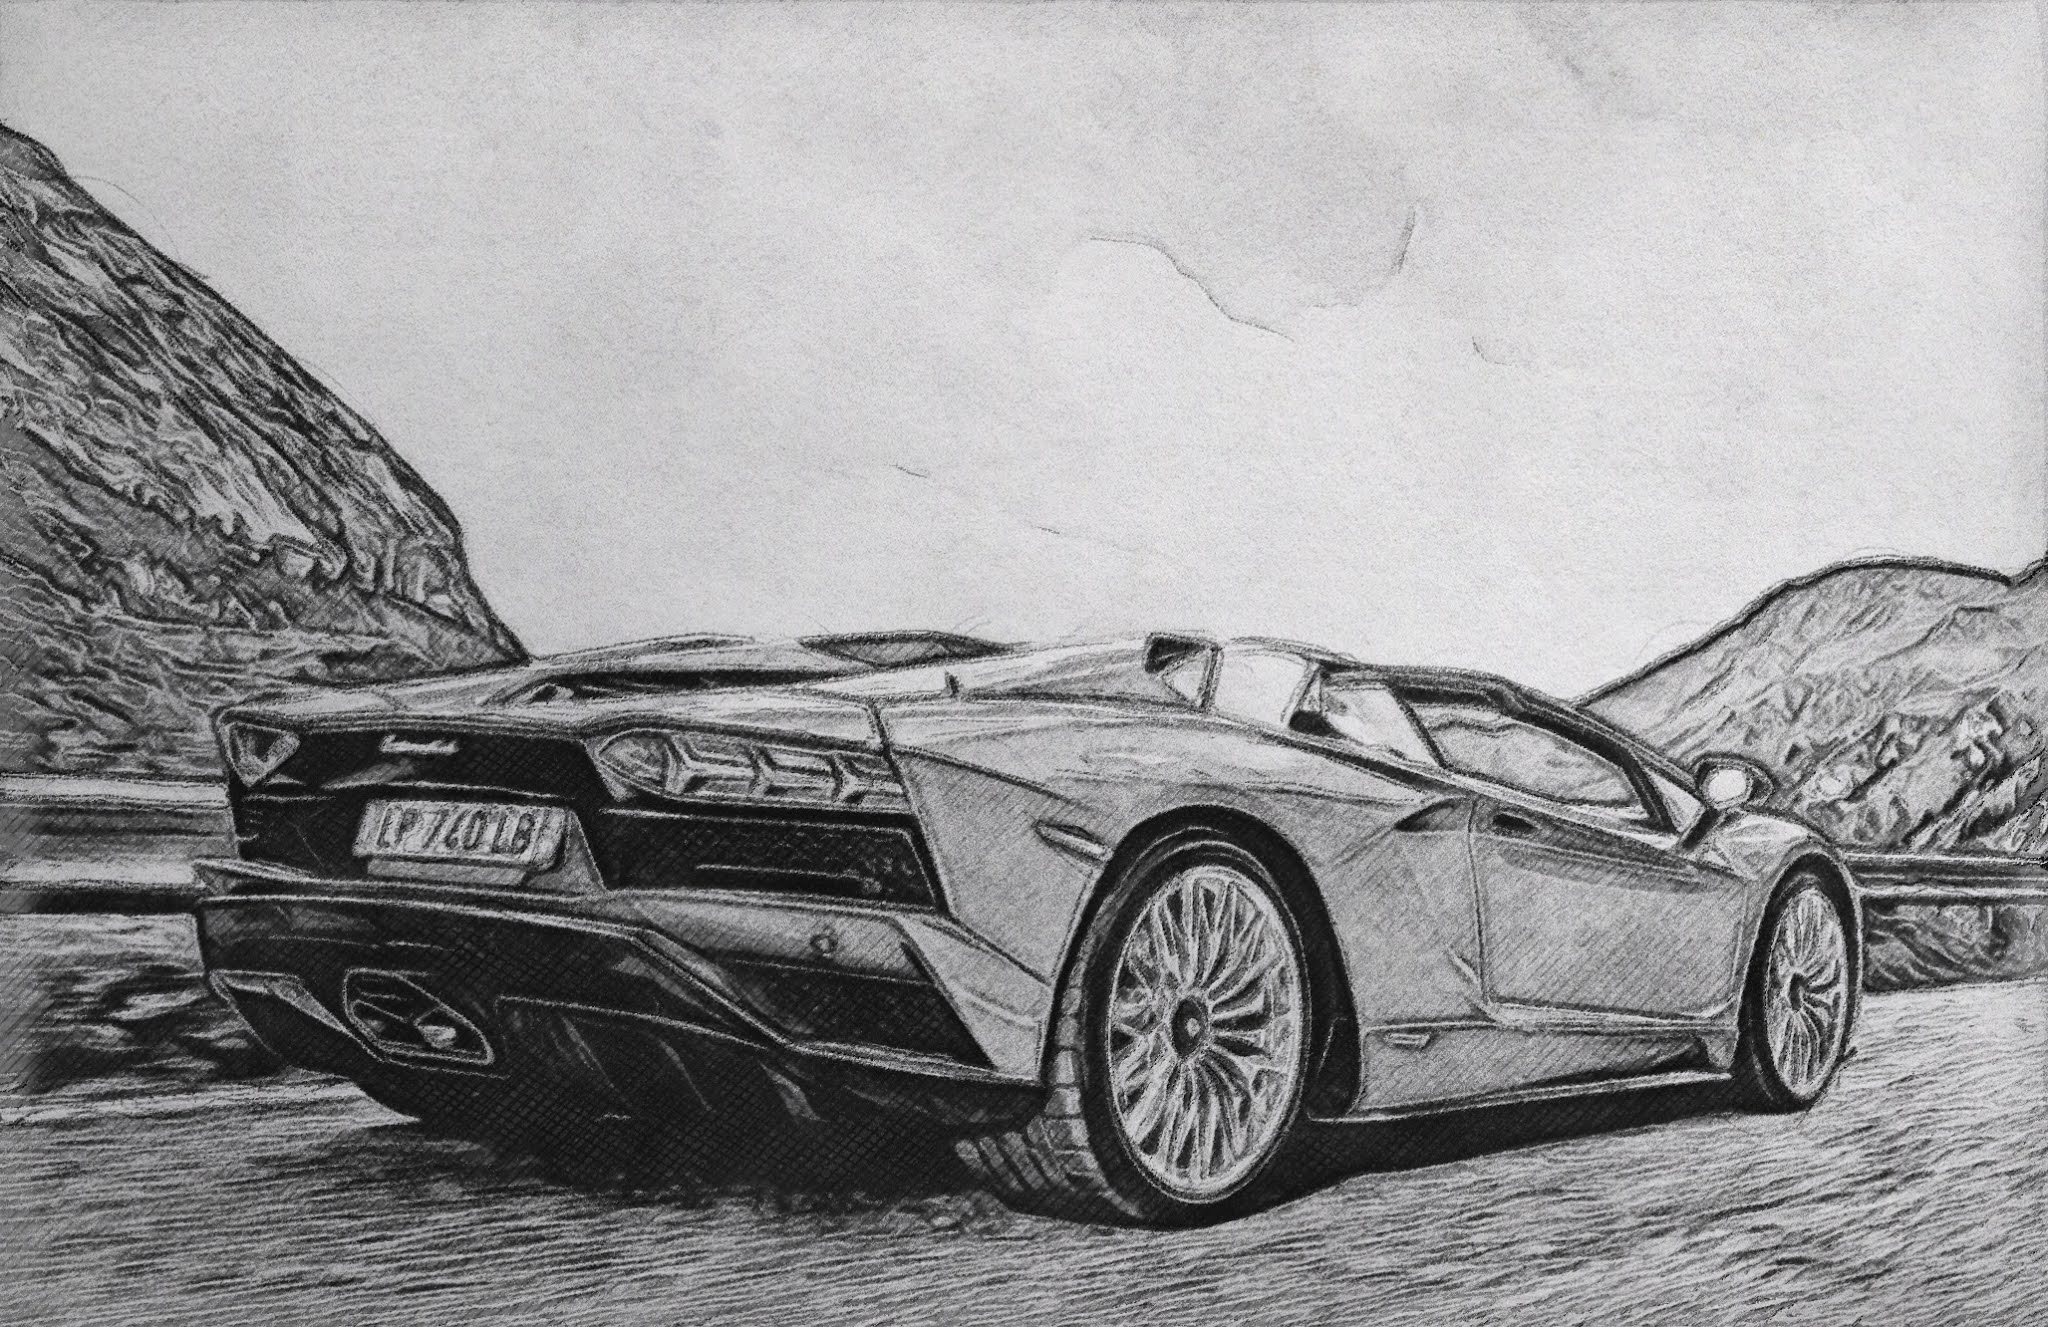 2018 Aventador S Roadster Pencil Drawing Car Sketches and